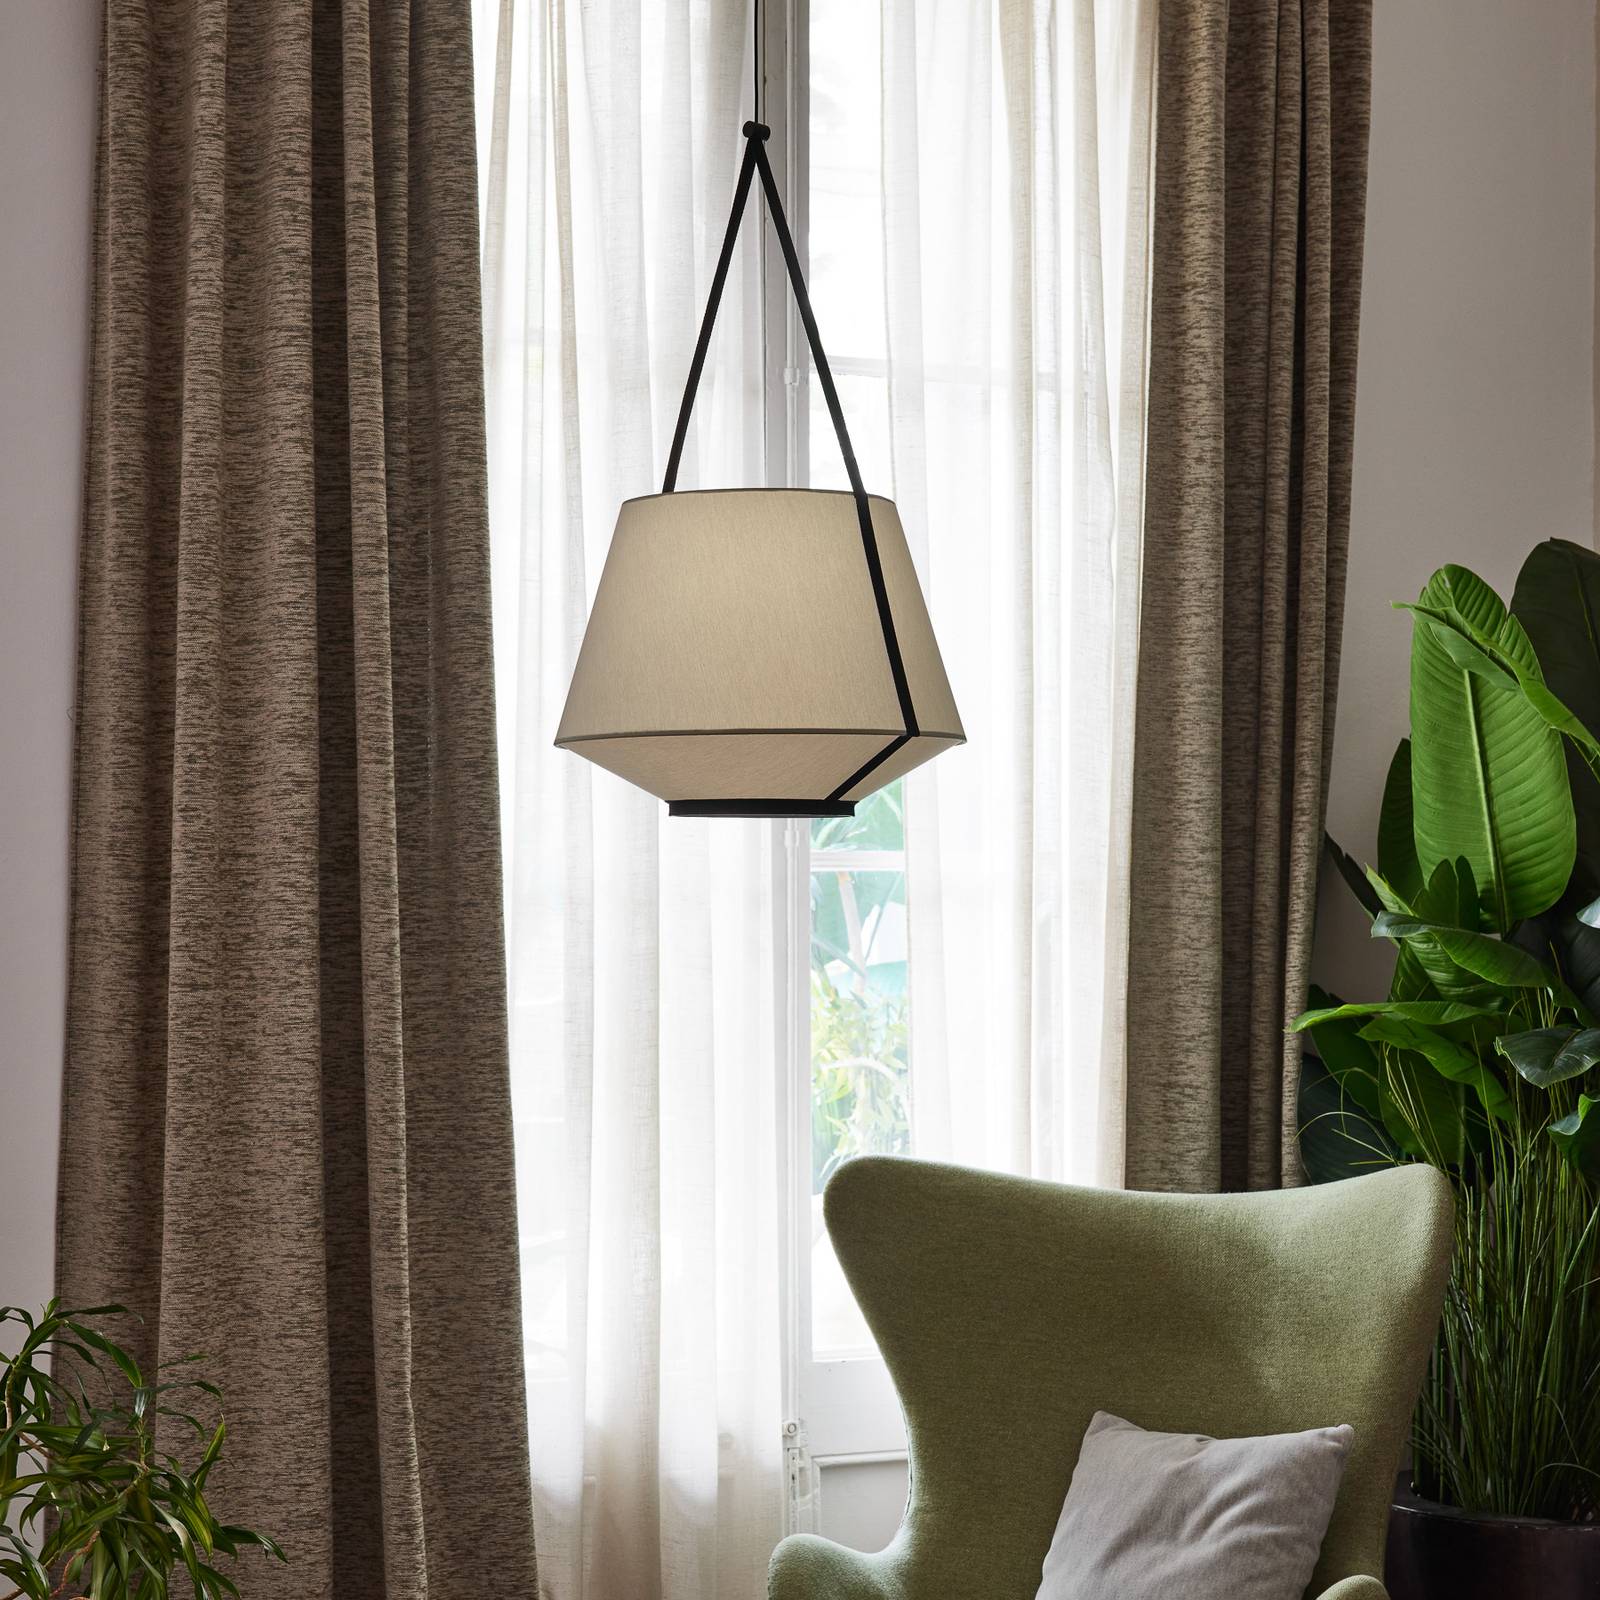 Image of Forestier Carrie S suspension, vert olive 3700663923551